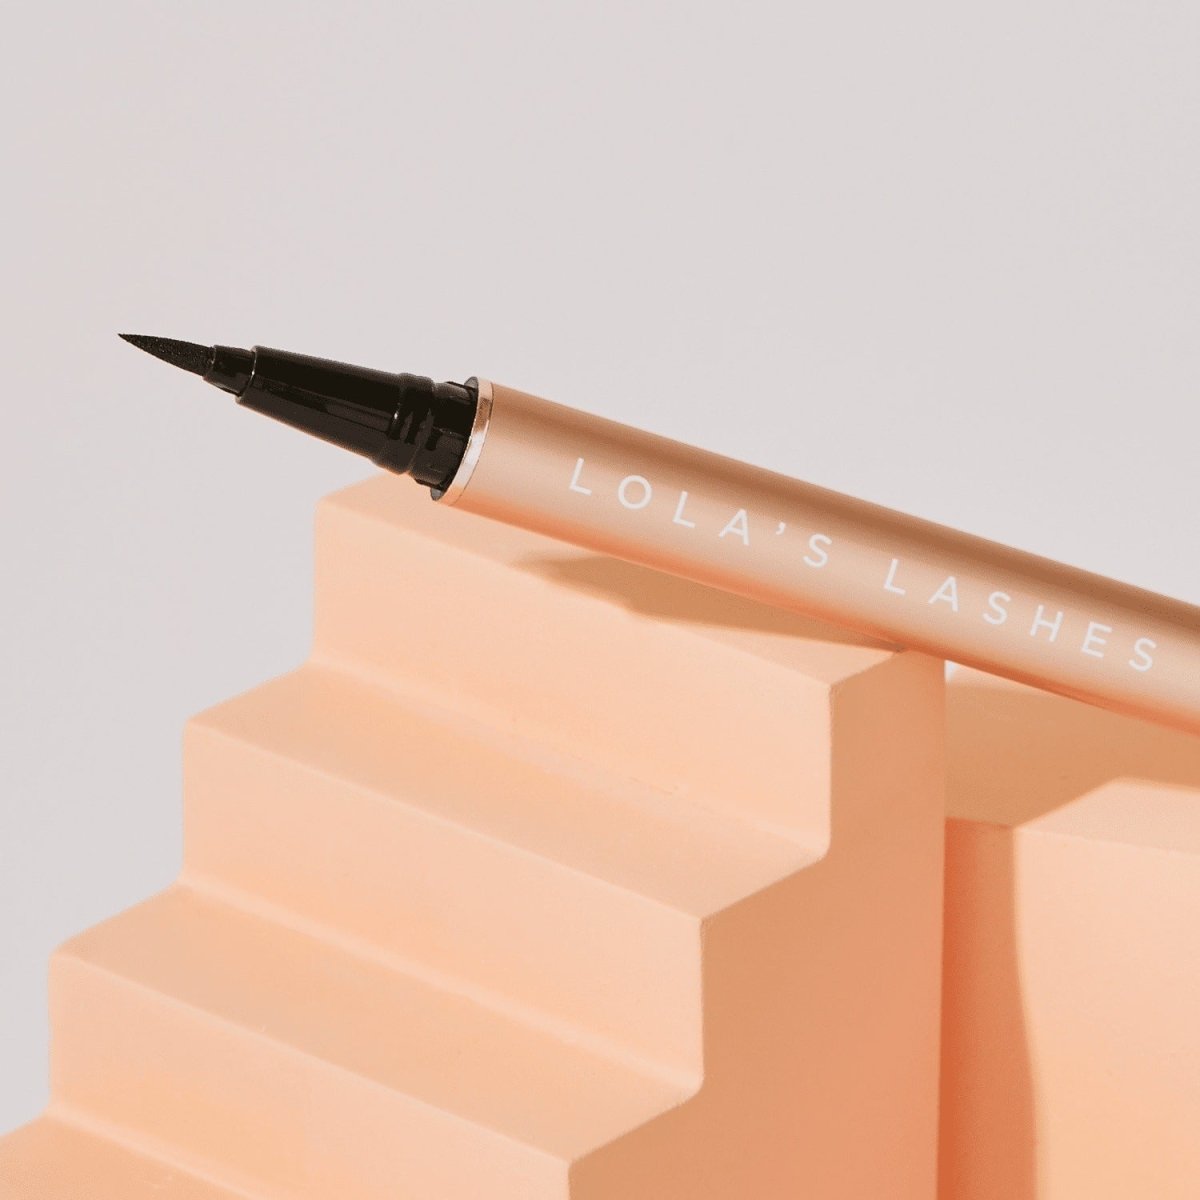 Flick and Stick Adhesive Eyeliner Precision Pen Duo - Lola's Lashes